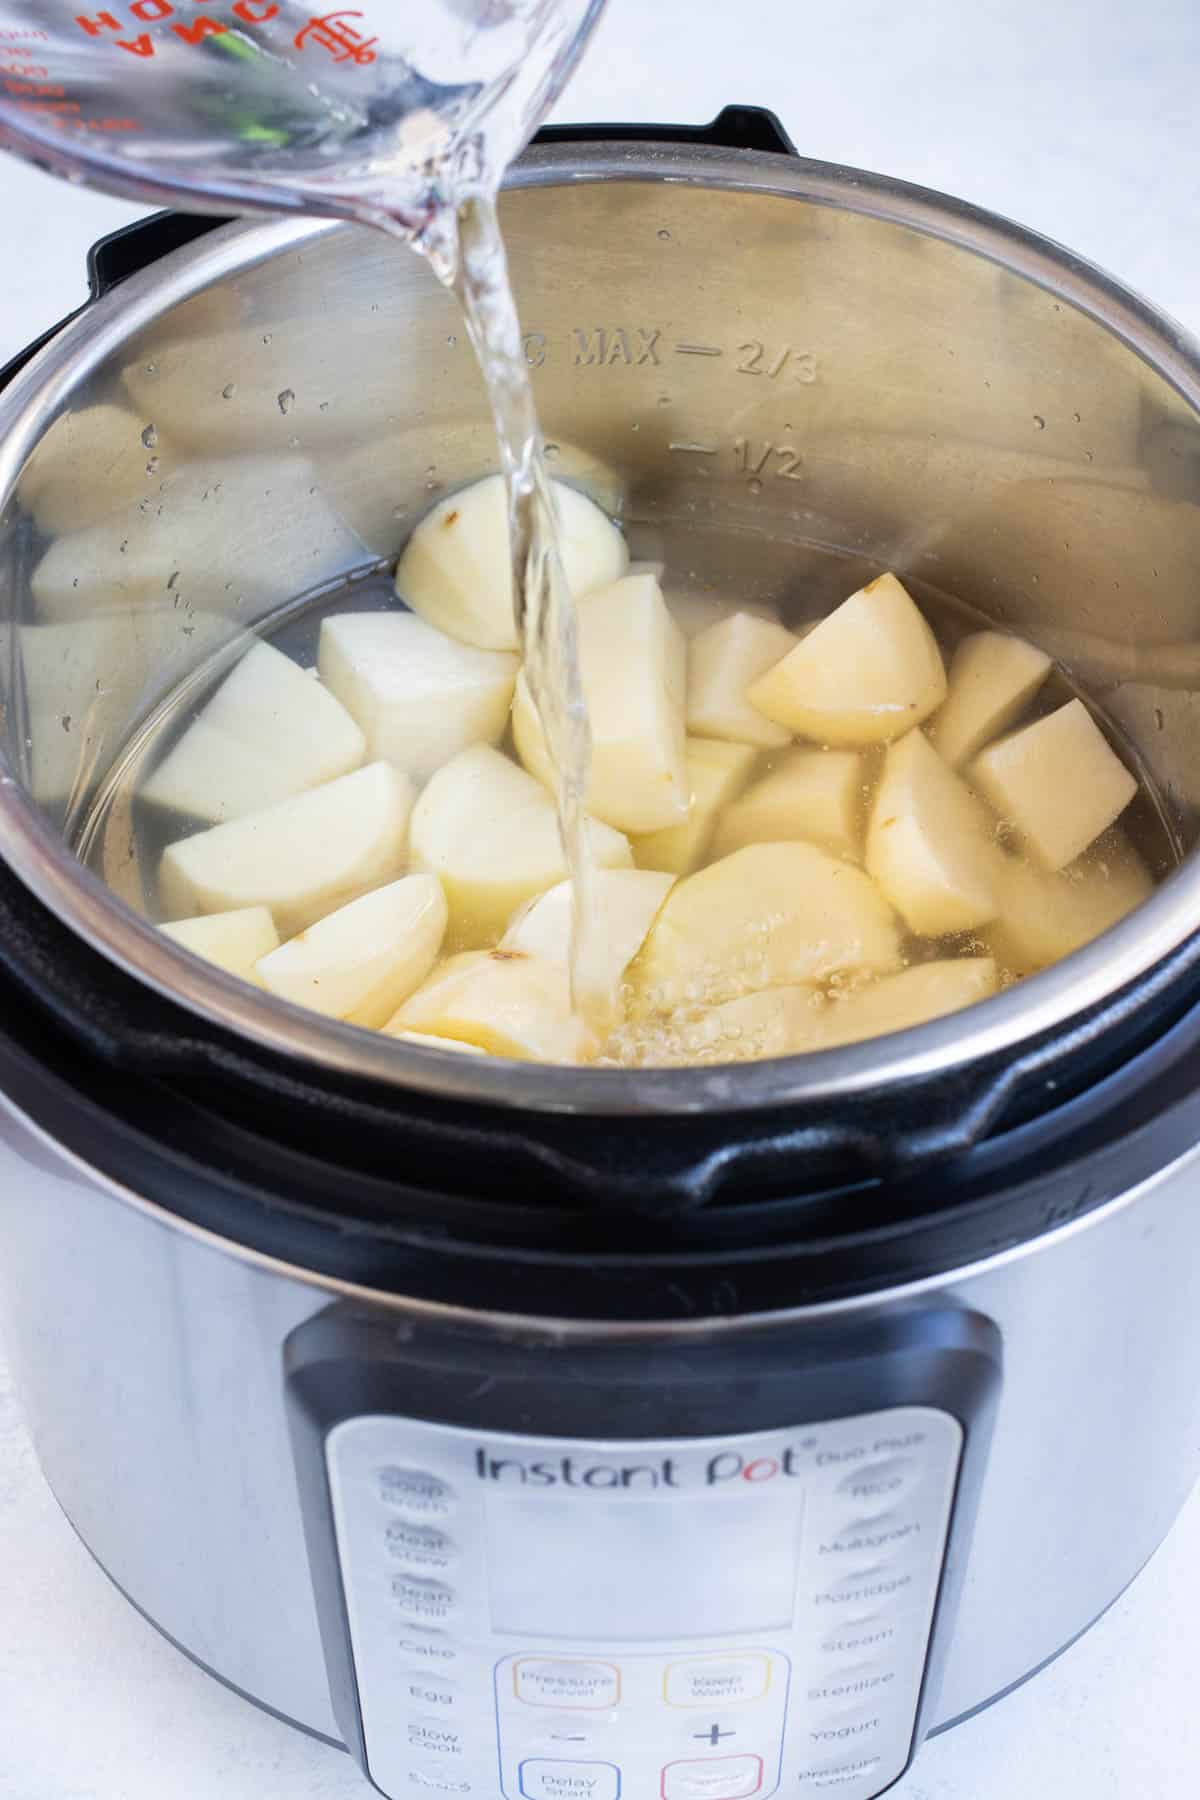 Potatoes and water are added to an Instant Pot.